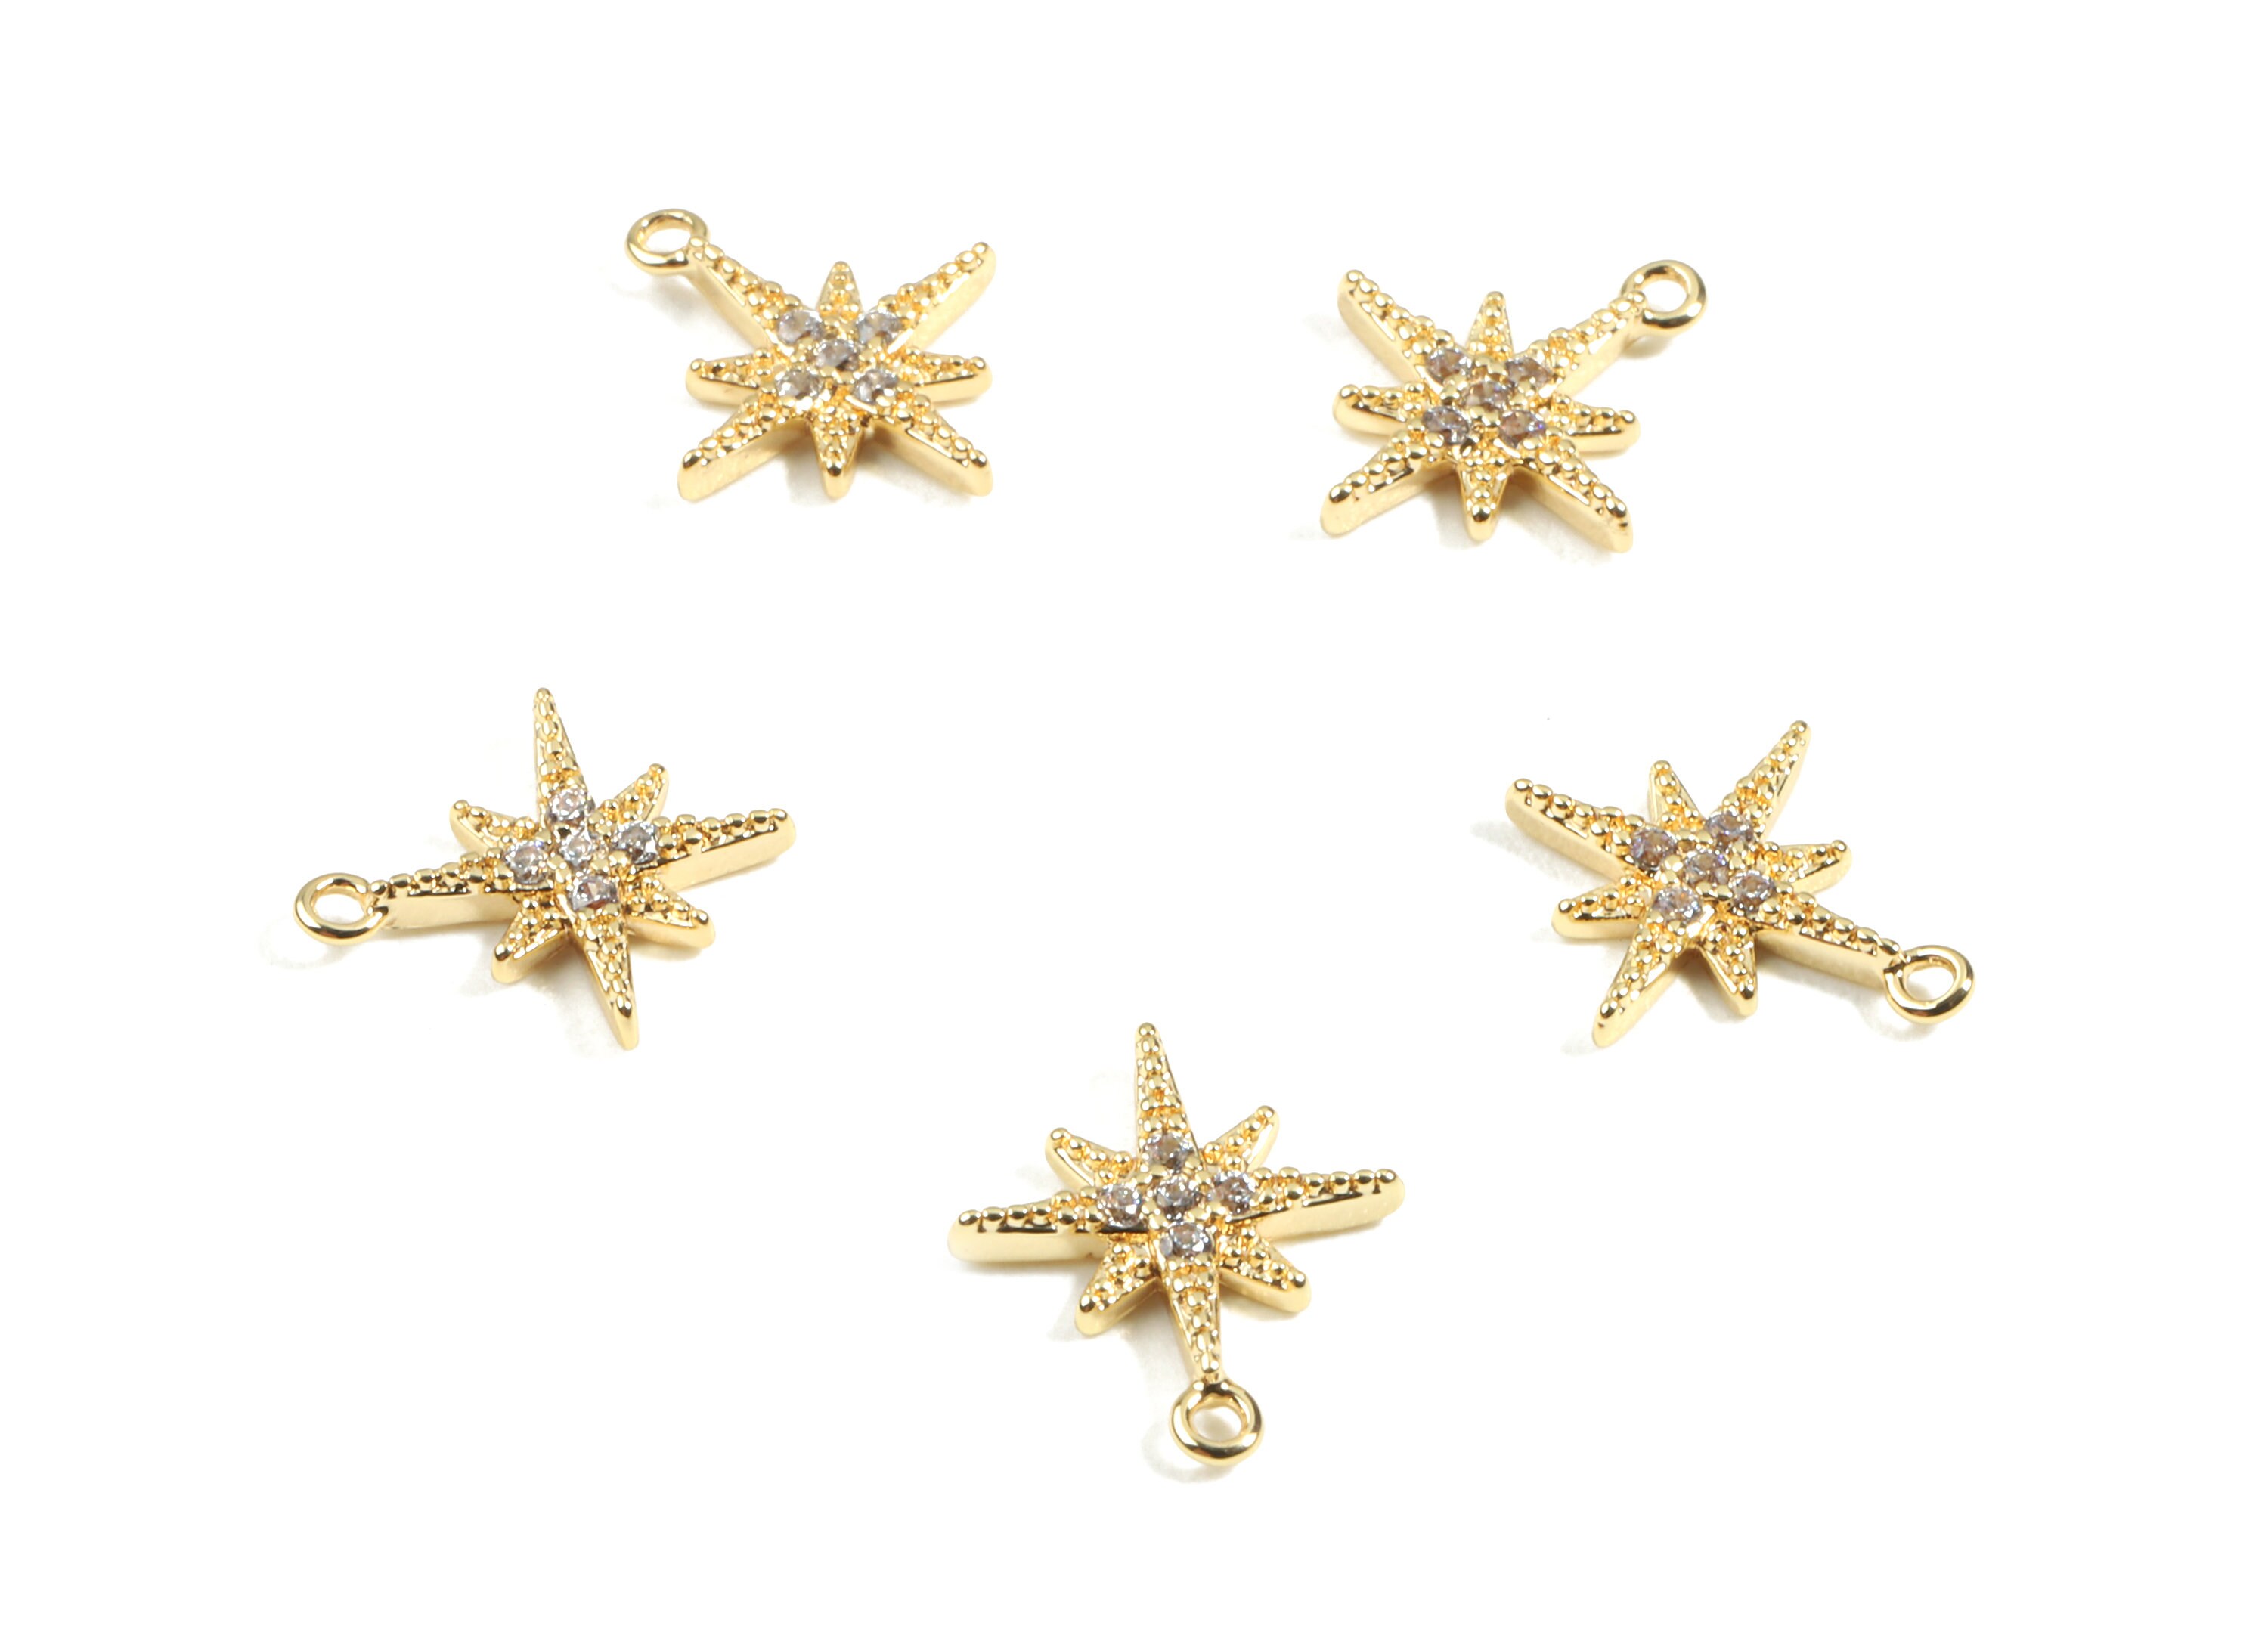 6pcs Cutout Star Charms, #240 jewelry making, earring charms, star charms,  earring making, charms for earrings, Fourth of July, star charms